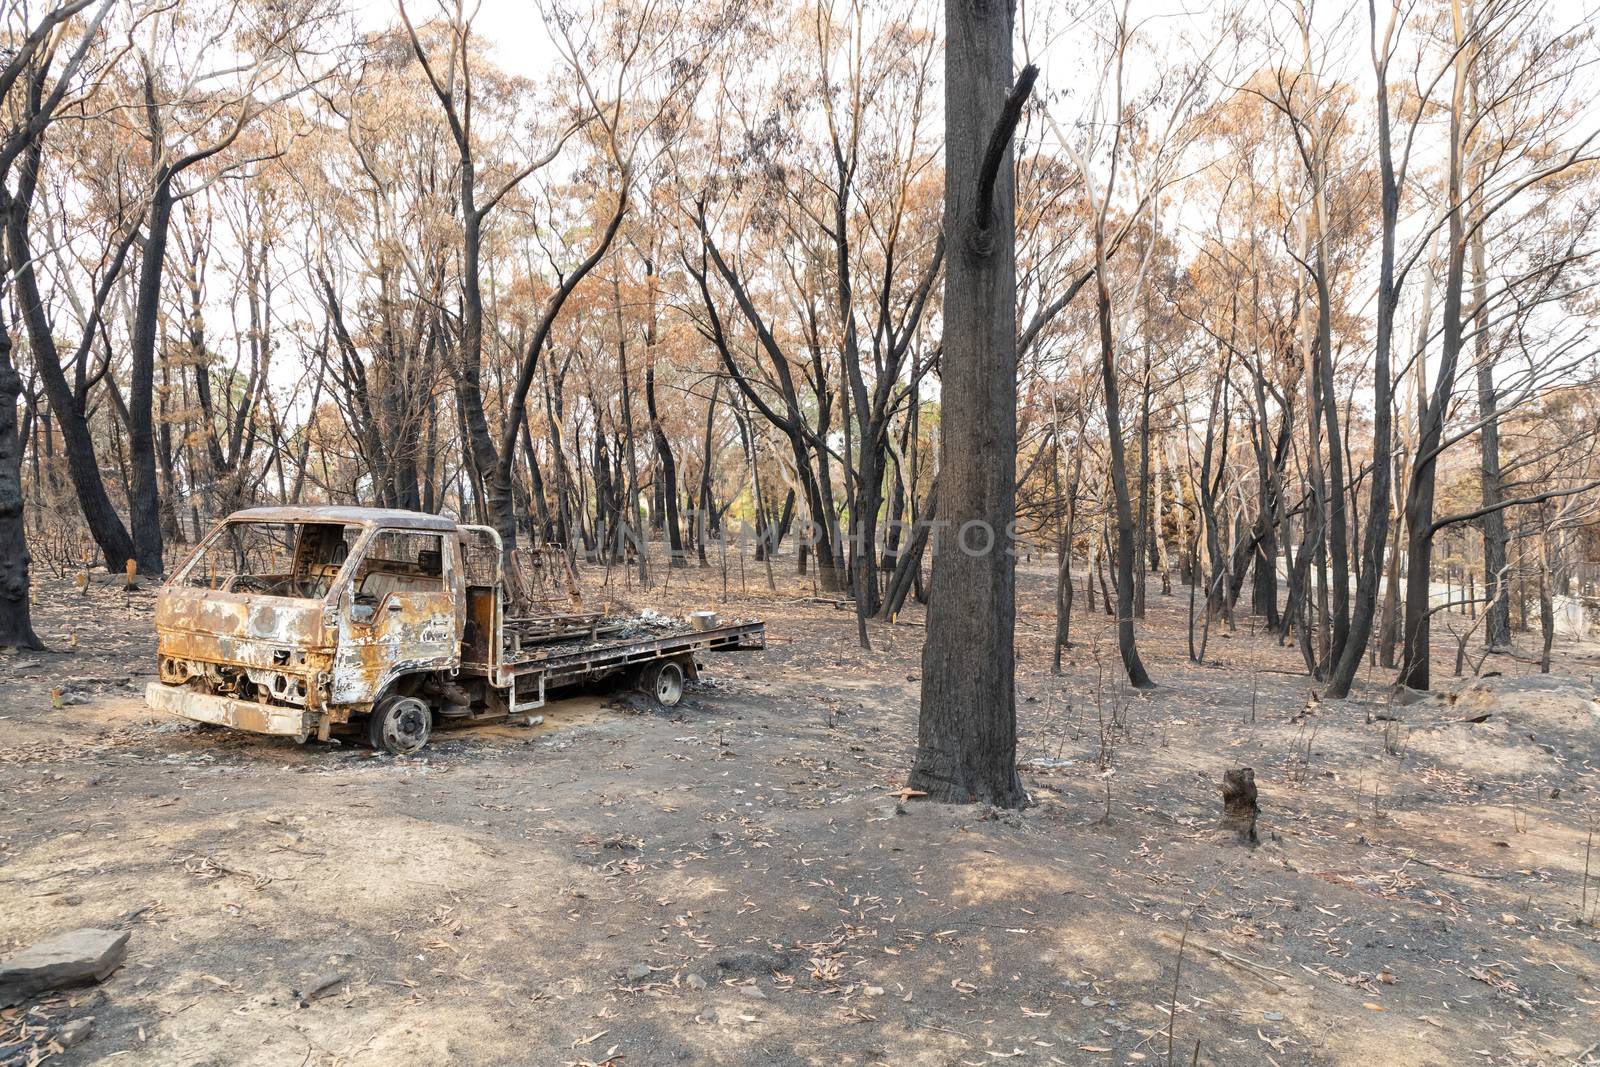 A burnt truck amongst severely burnt gum trees after a bushfire in The Blue Mountains in Australia by WittkePhotos